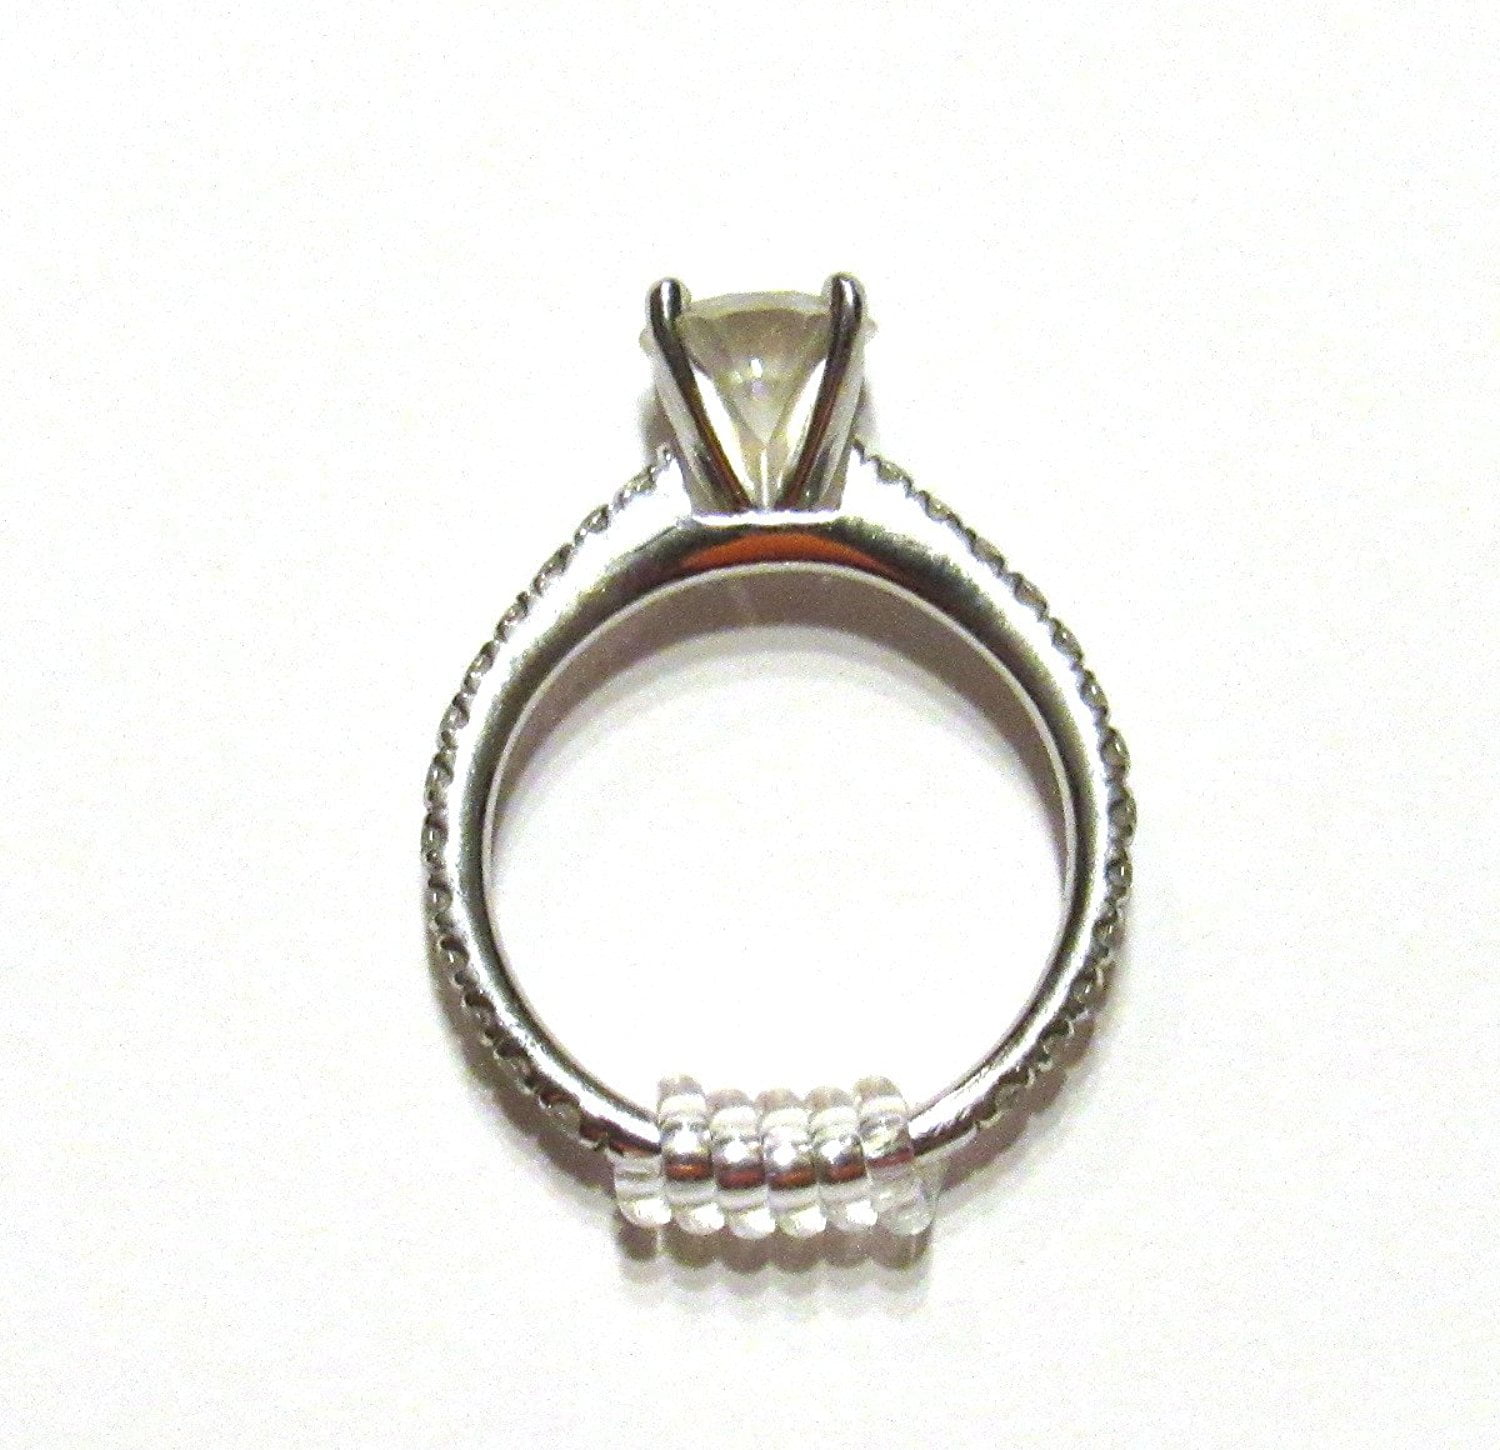 Ring Clips, how to fit and use them to rings that are too big for children  or adults